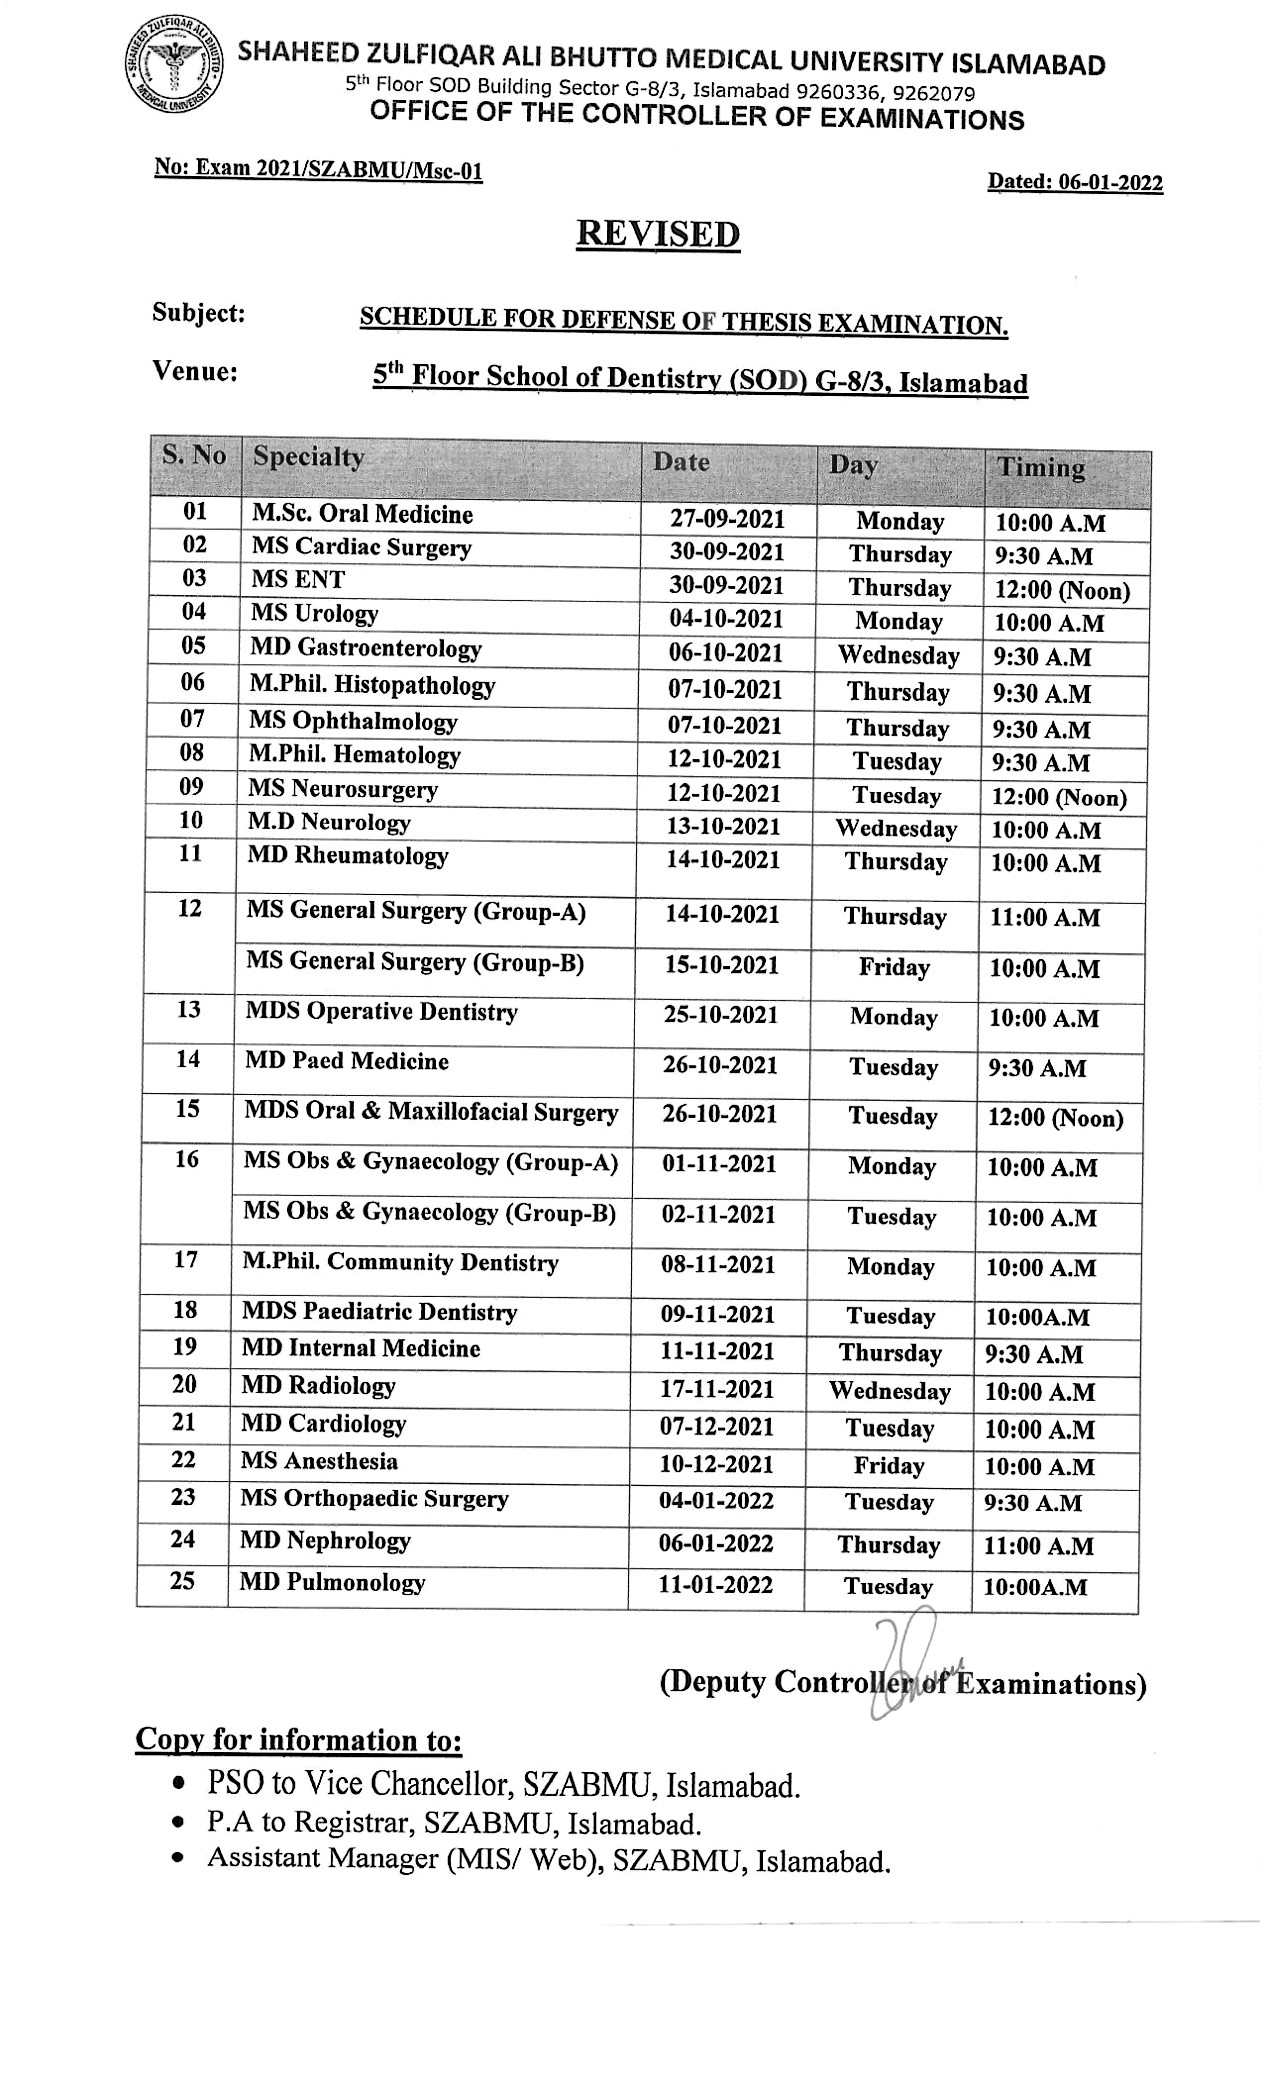 Revised - Schedule for Defense of Thesis Examinations